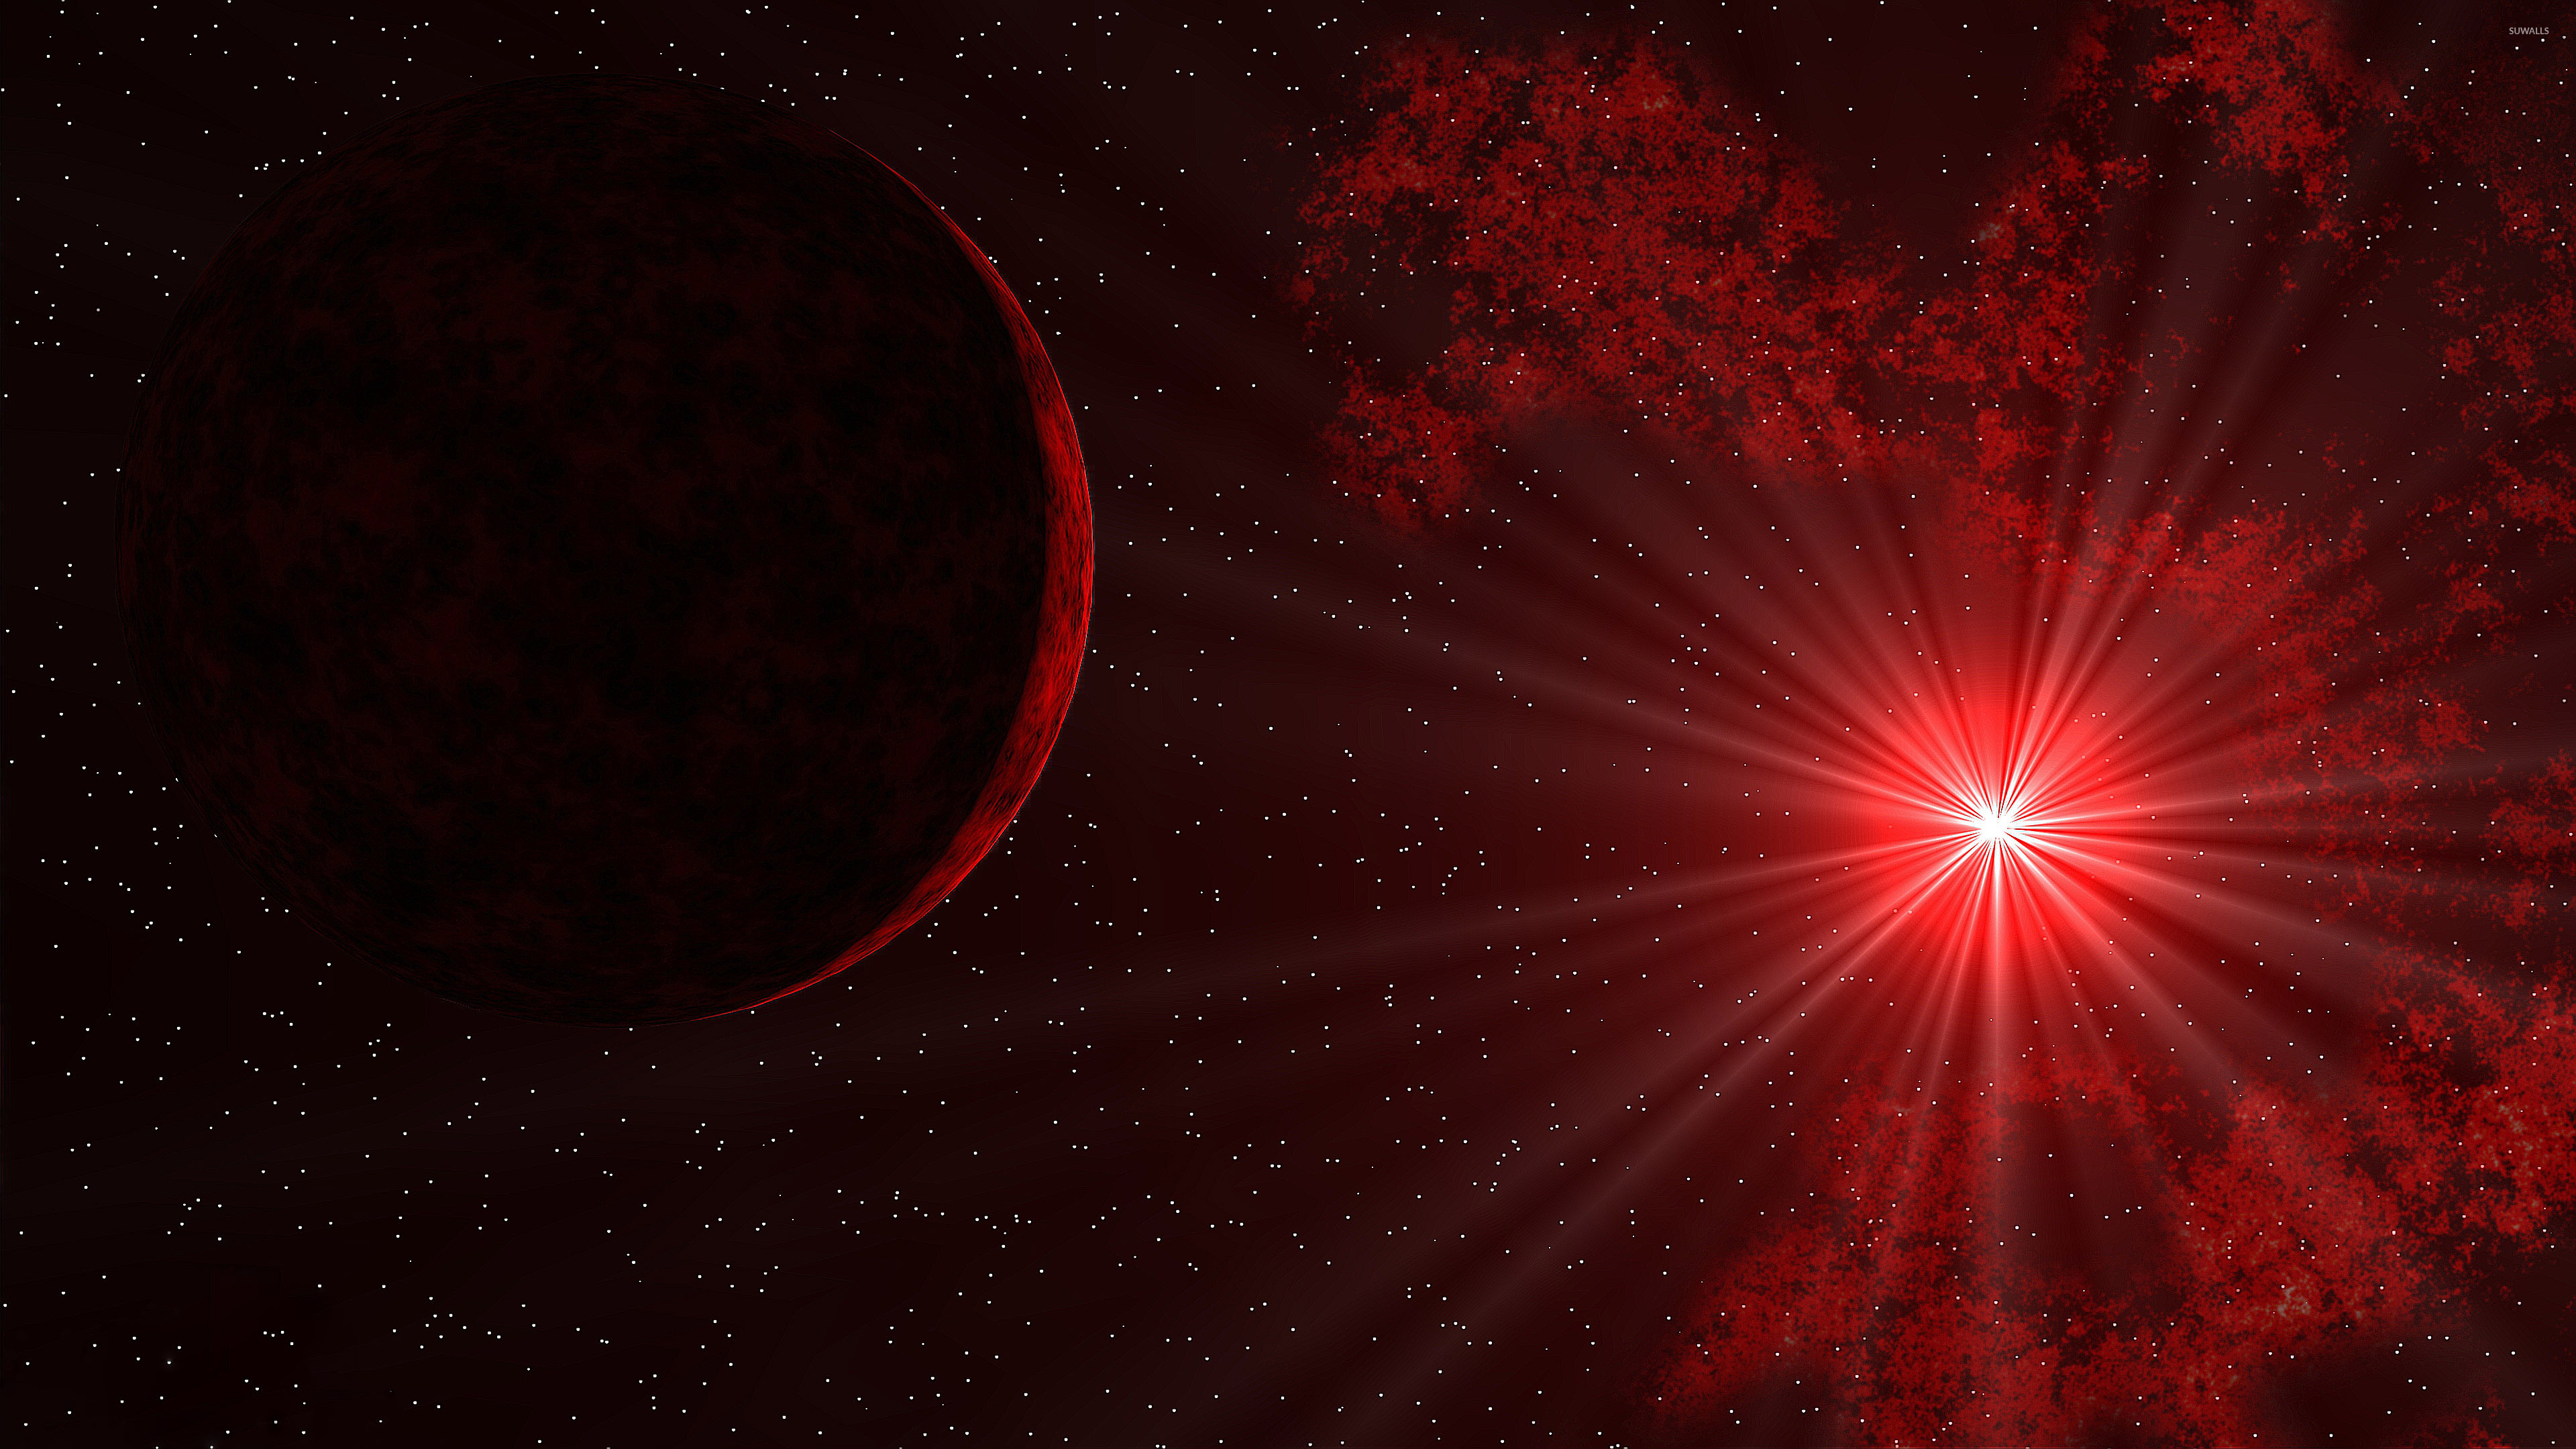 Sunlight through red space wallpaper - Space wallpapers - #38306